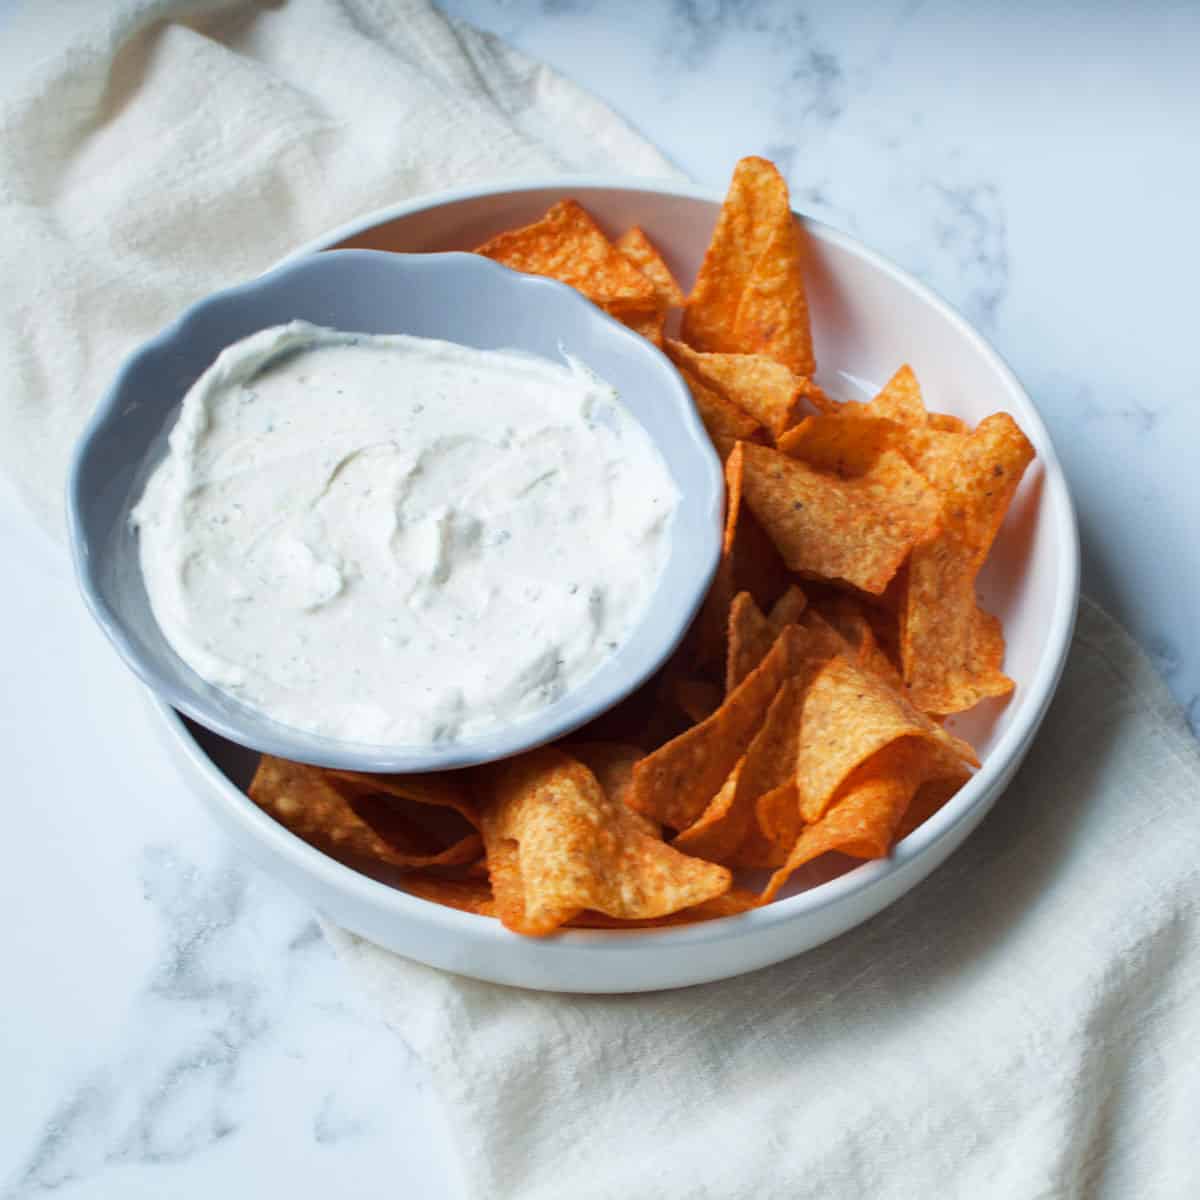 Dip for doritos in a gray bowl surrounded by doritos in a white bowl